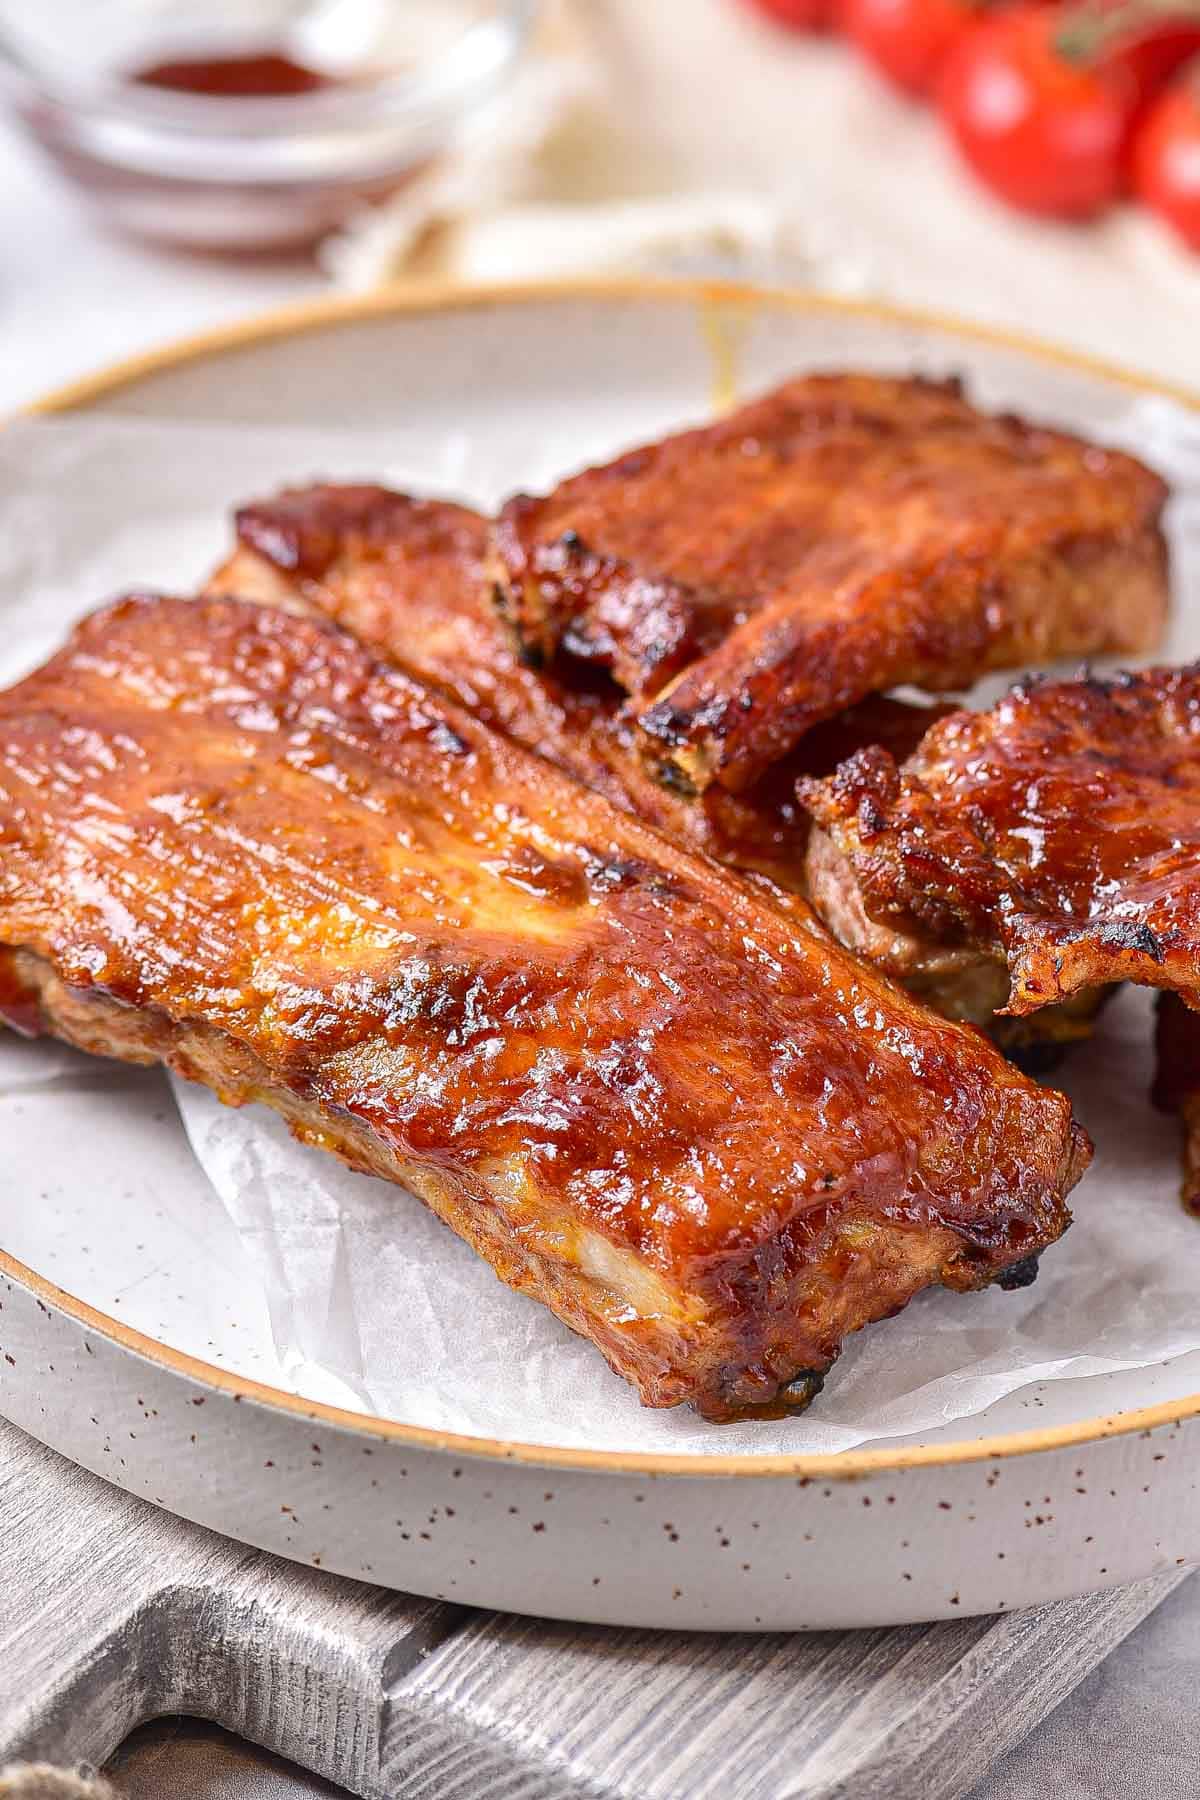 three pieces of cooked ribs on plate sitting on table.